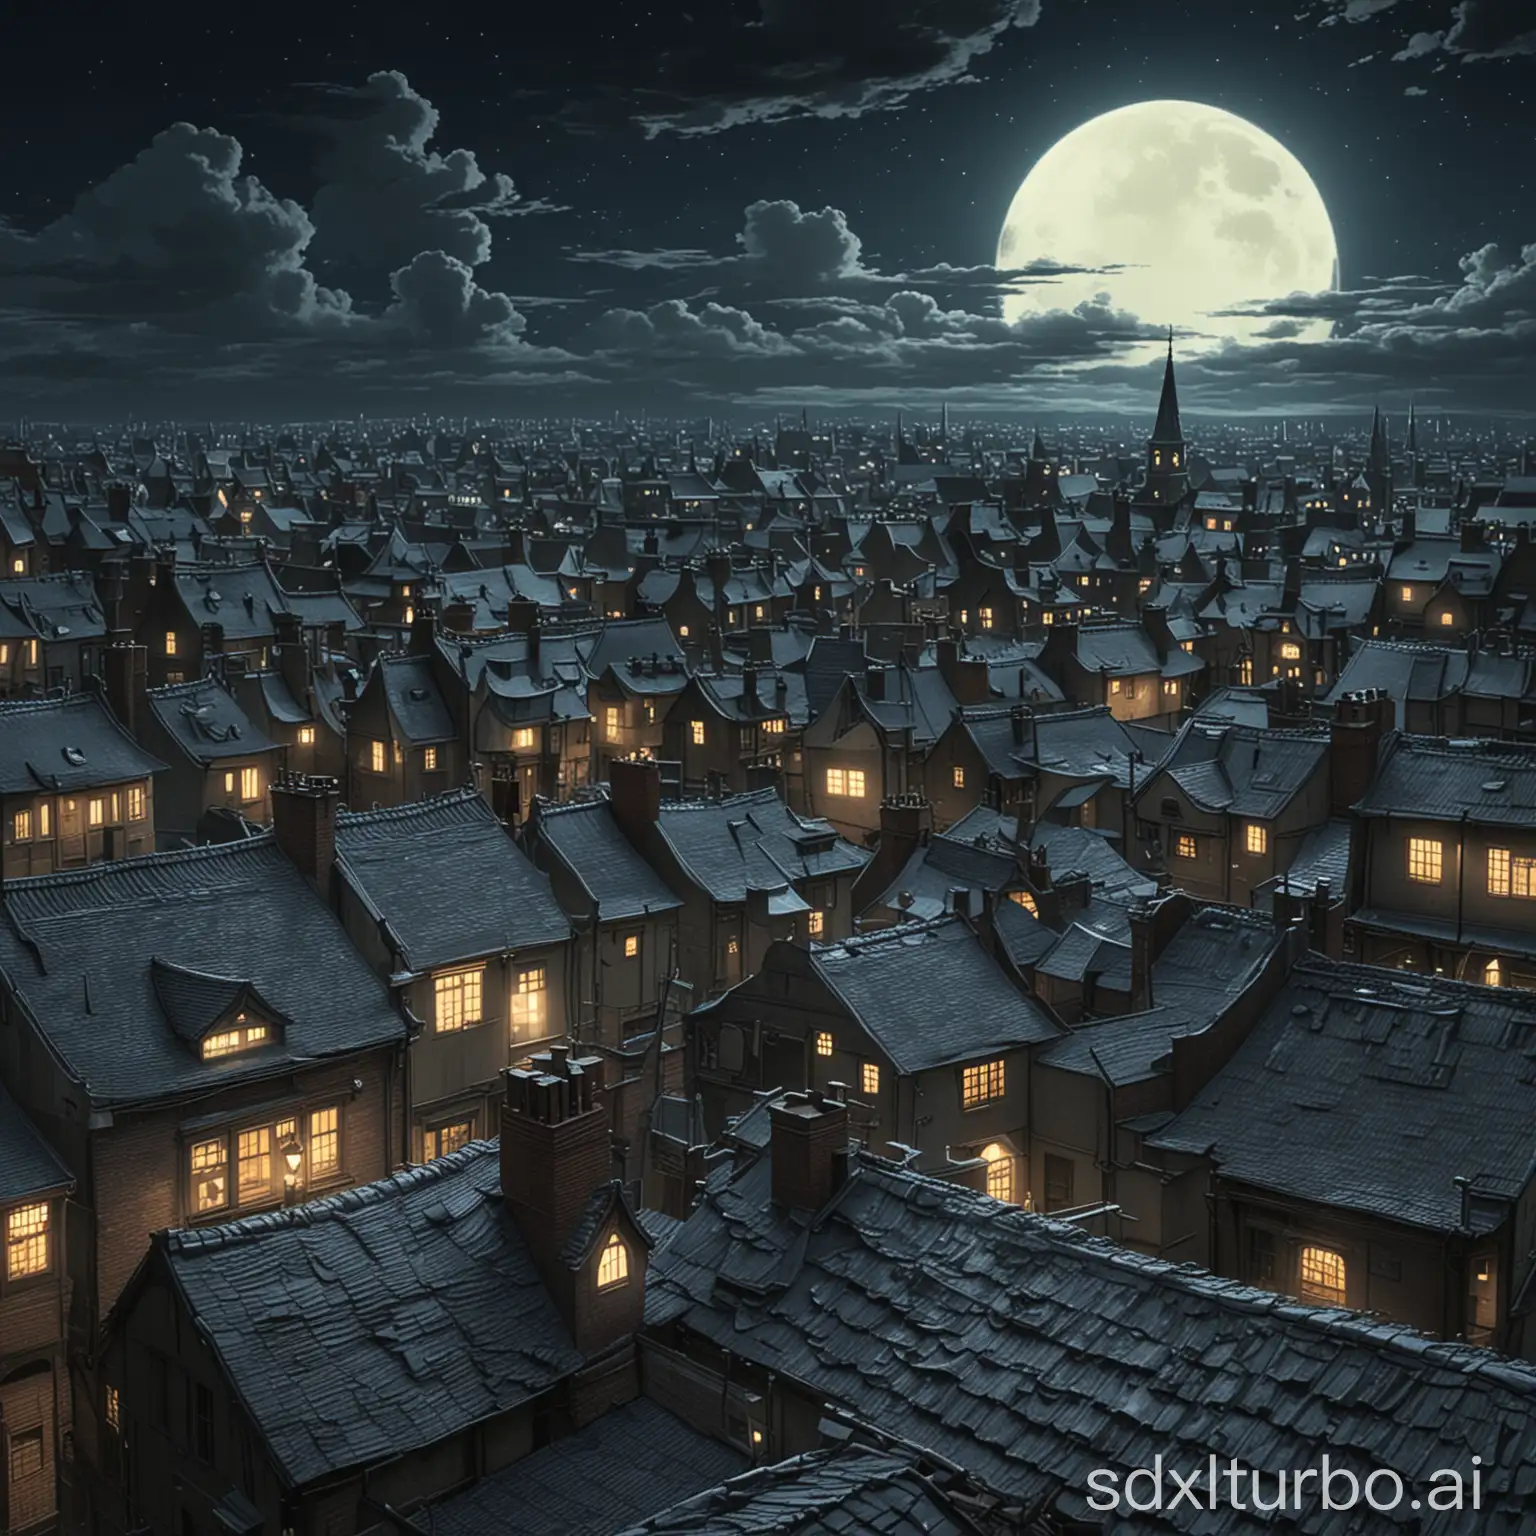 victorian roofscape at night, pale moonlight illuminating the scene, ariel view, studio ghibli style